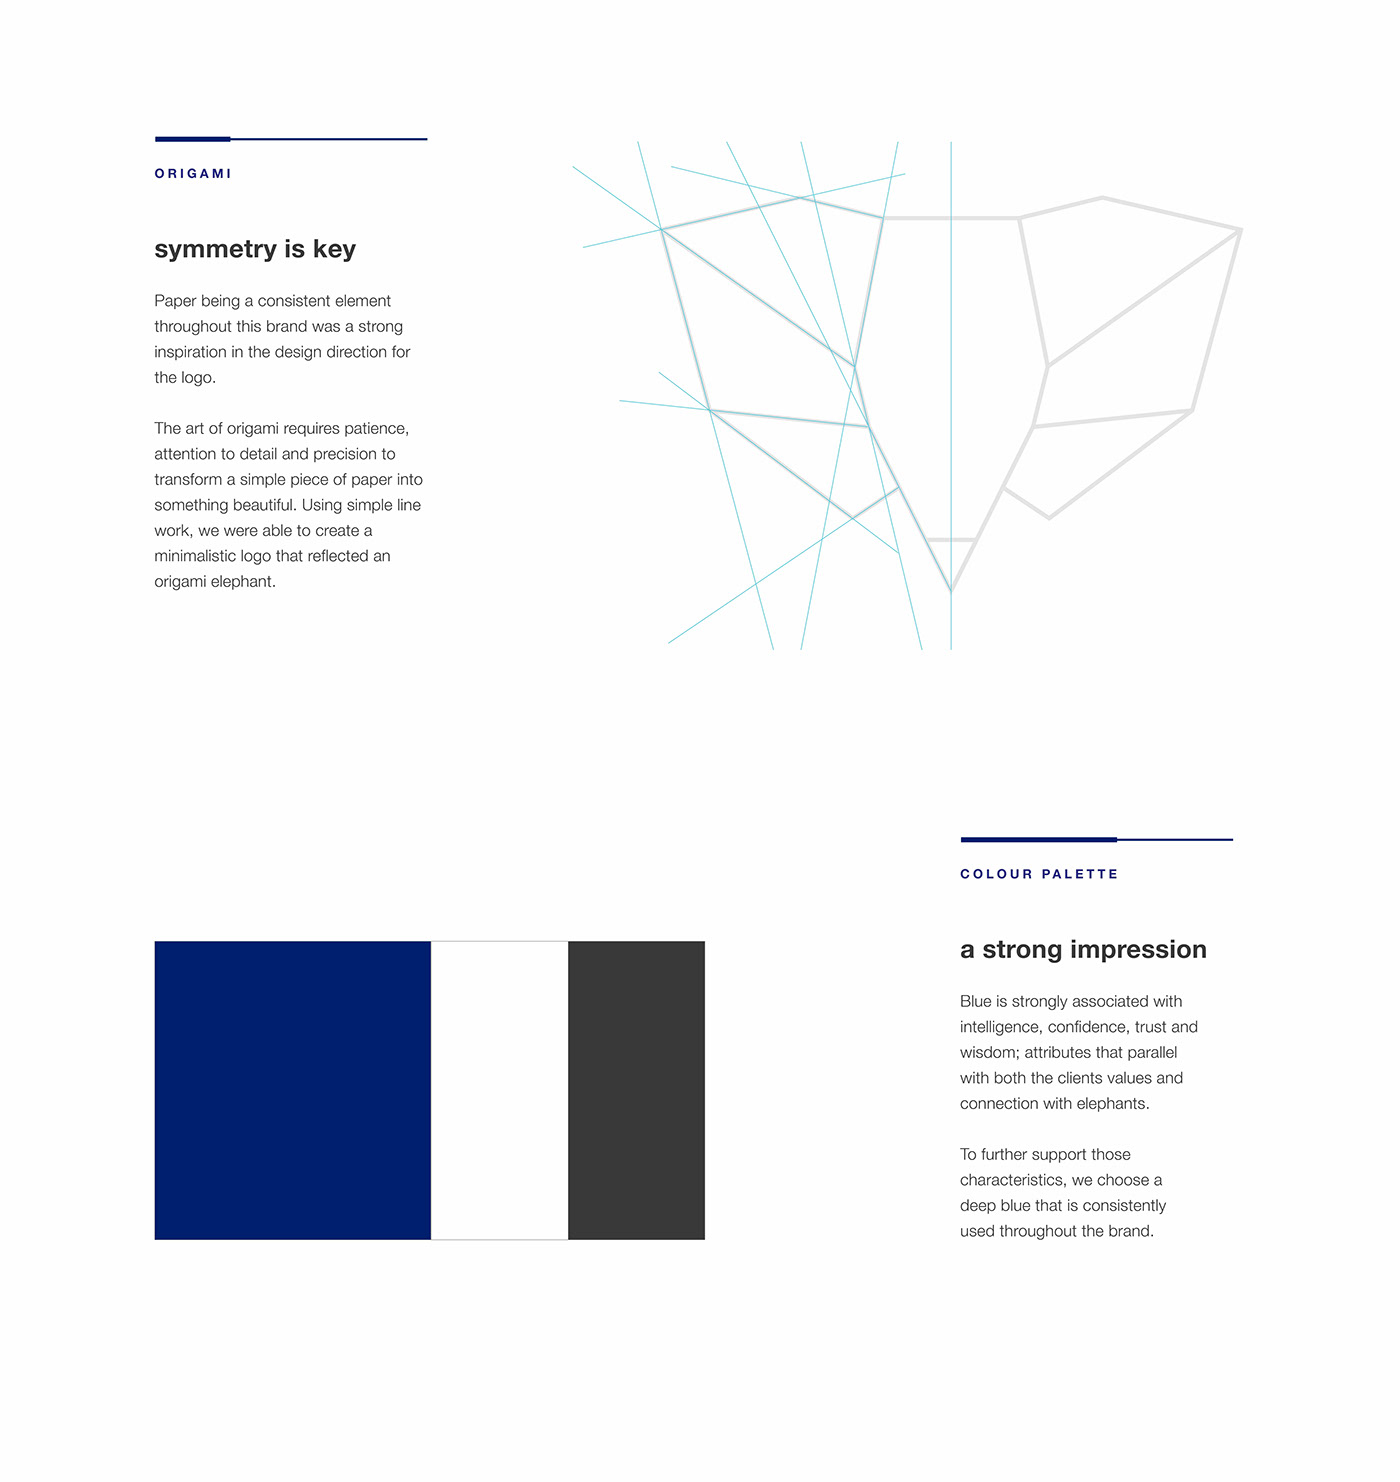 The design rationale behind the logo development and reasoning behind the colour palette.